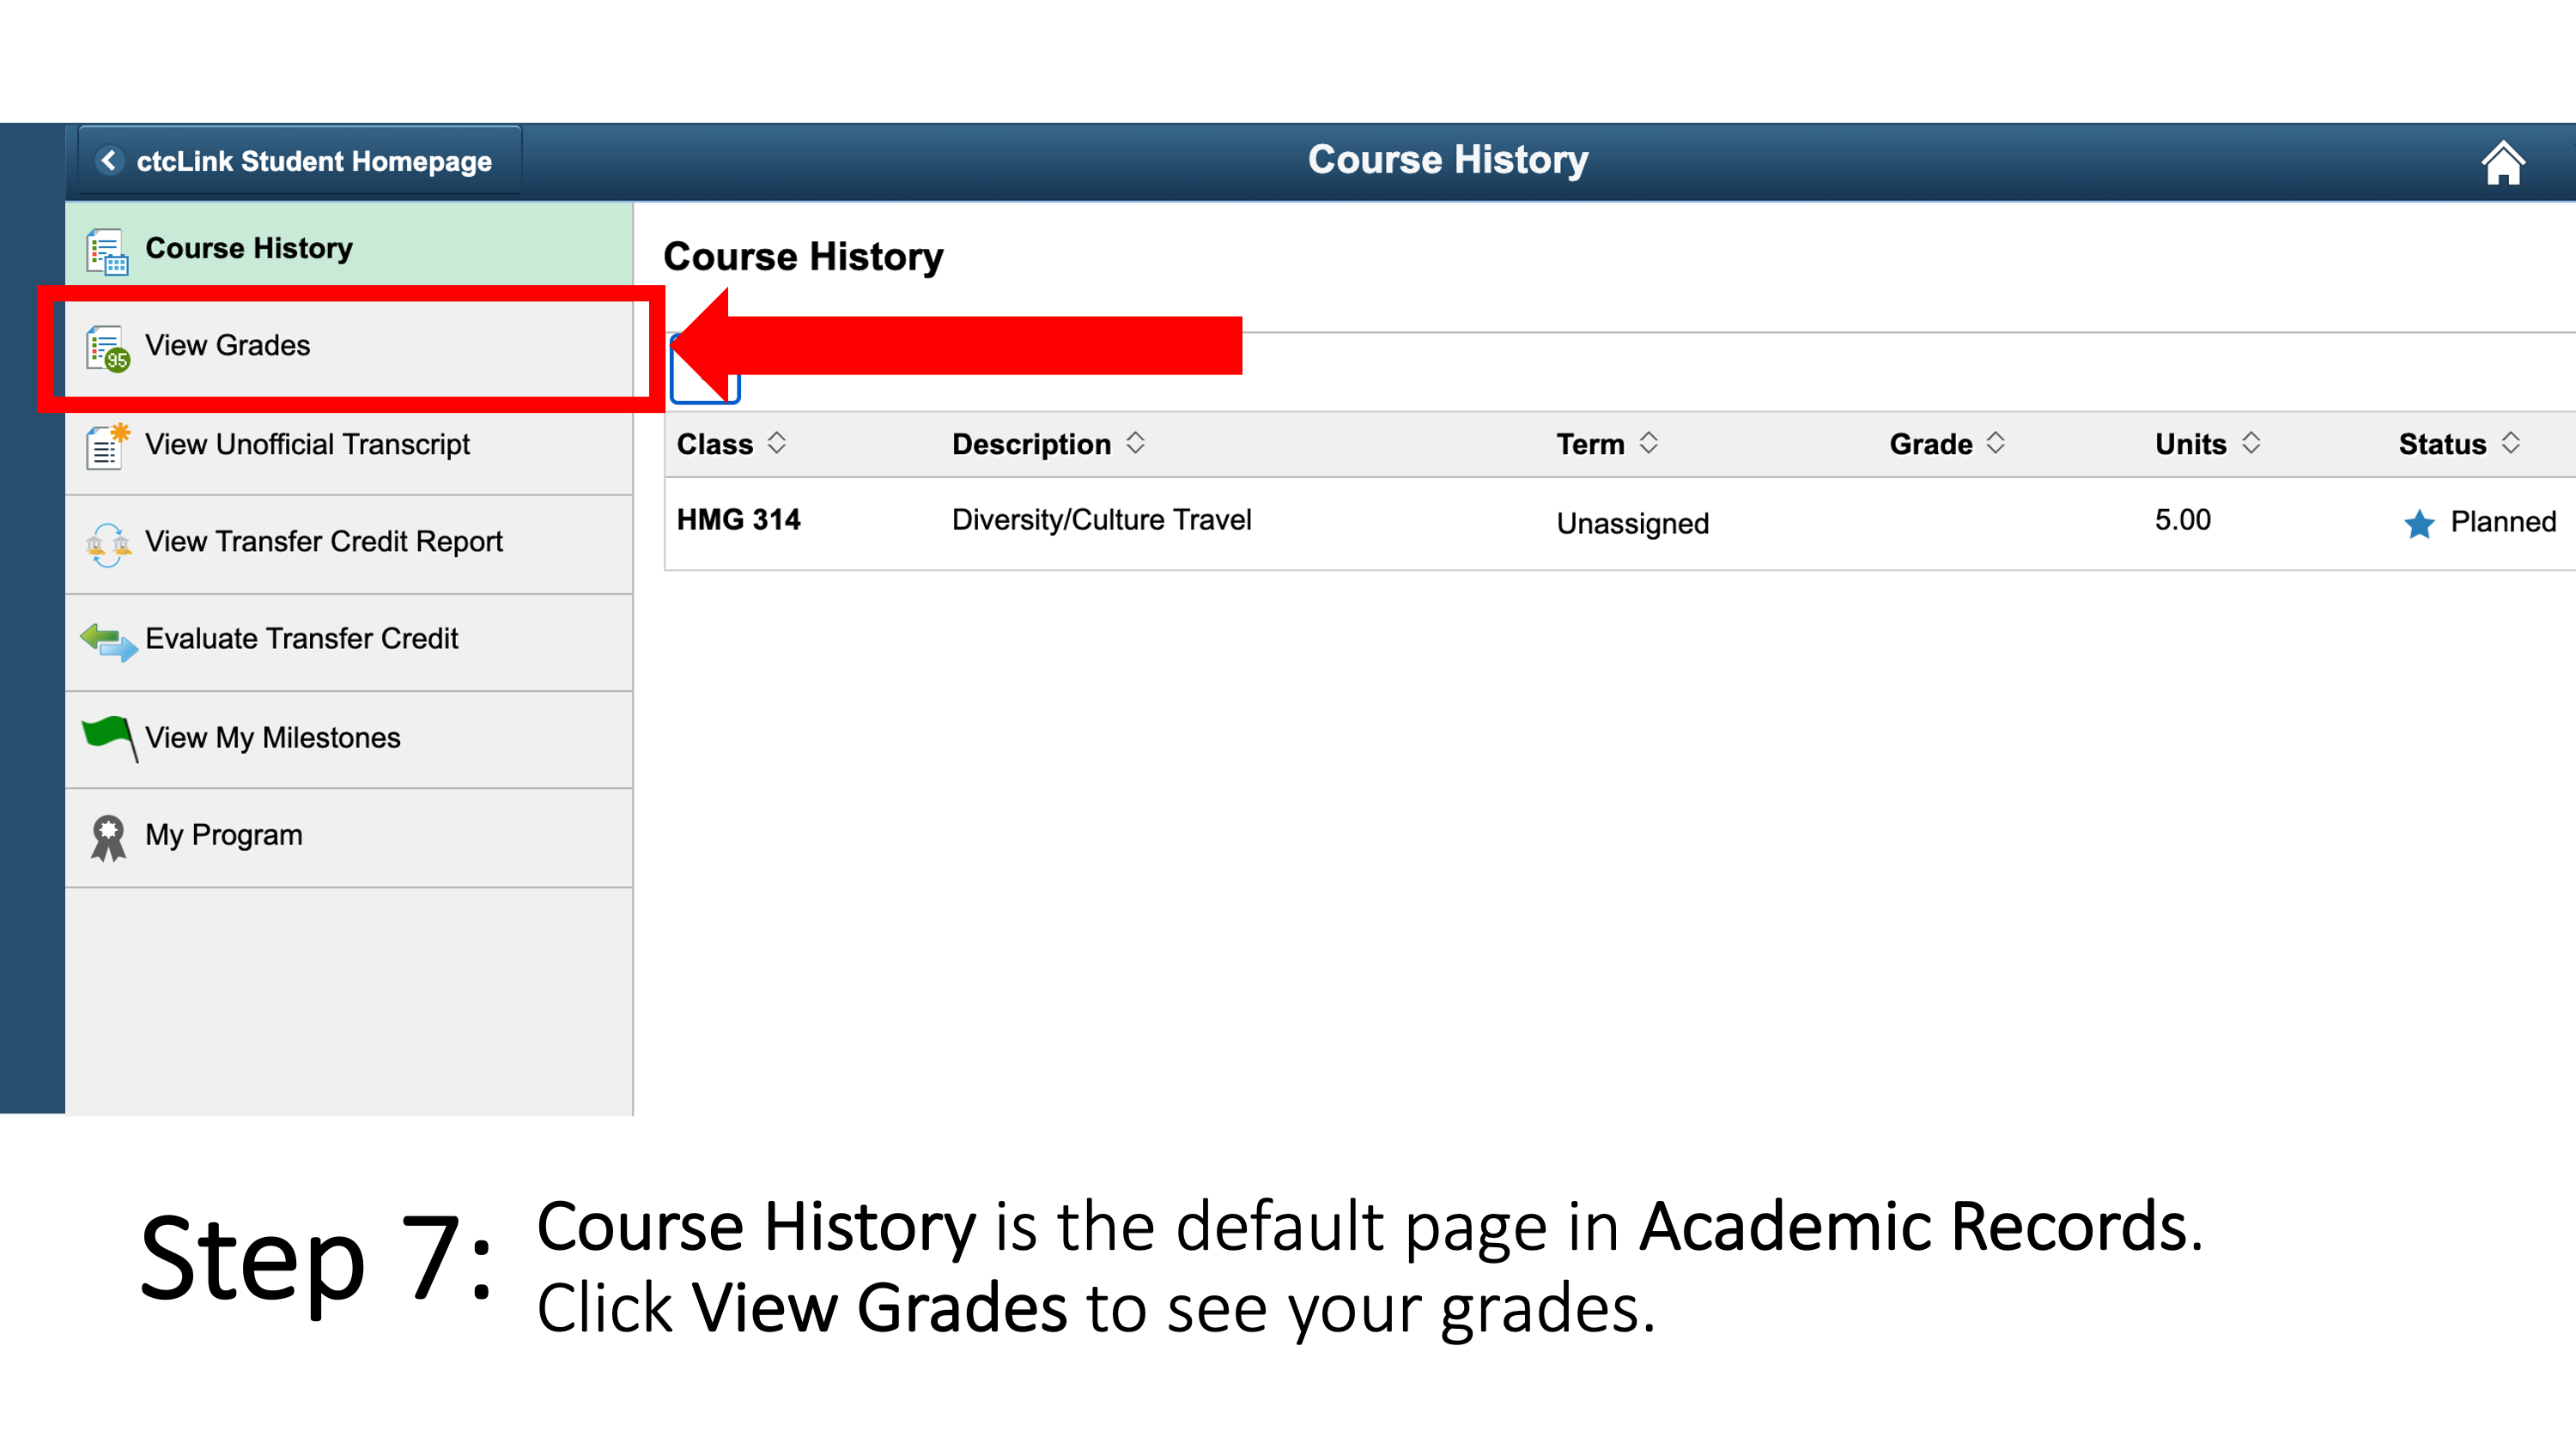 Course History is the default page in Academic Records. Click View Grades to see your grades.